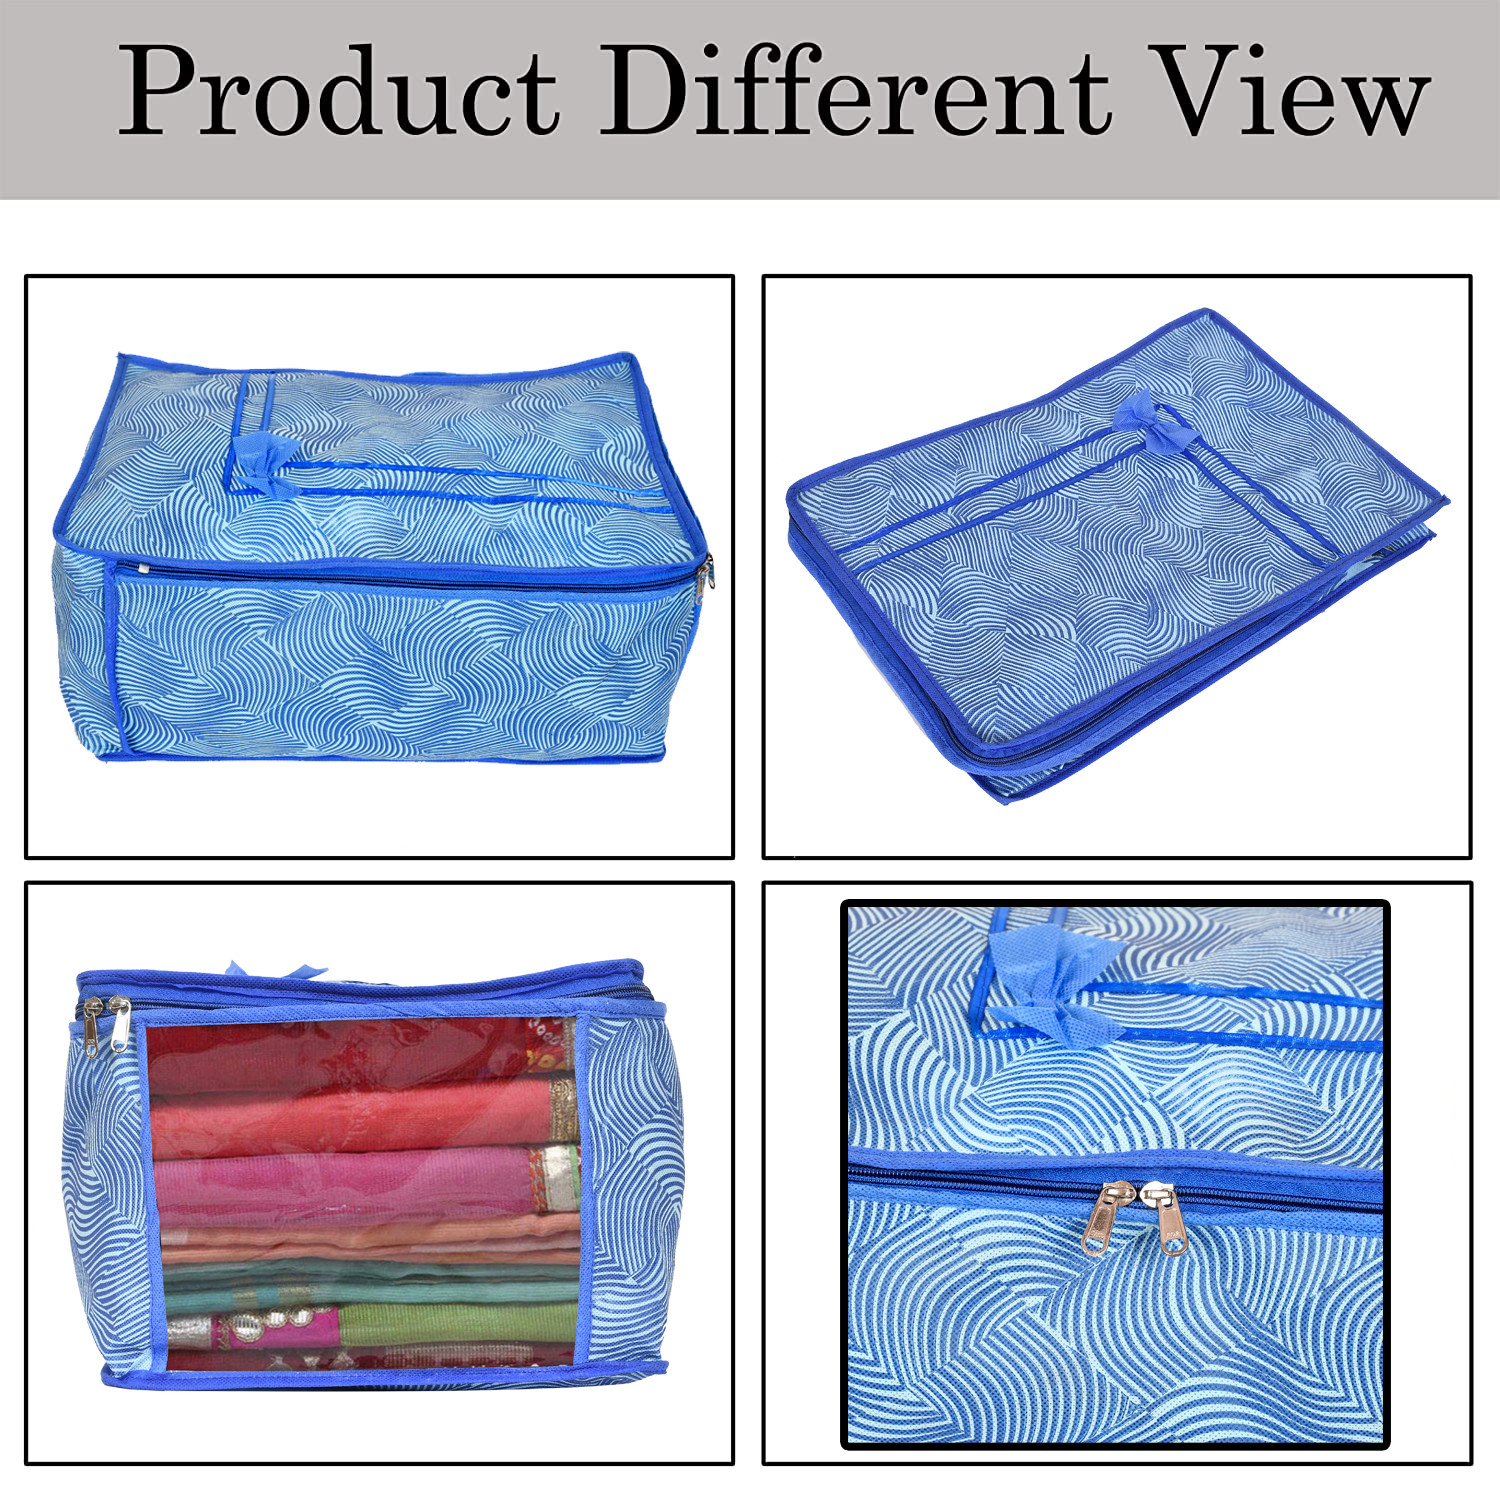 Kuber Industries Metalic Lahariya Print Non Woven Fabric Saree Cover/Clothes Organiser For Wardrobe Set with Transparent Window, Extra Large (Blue)